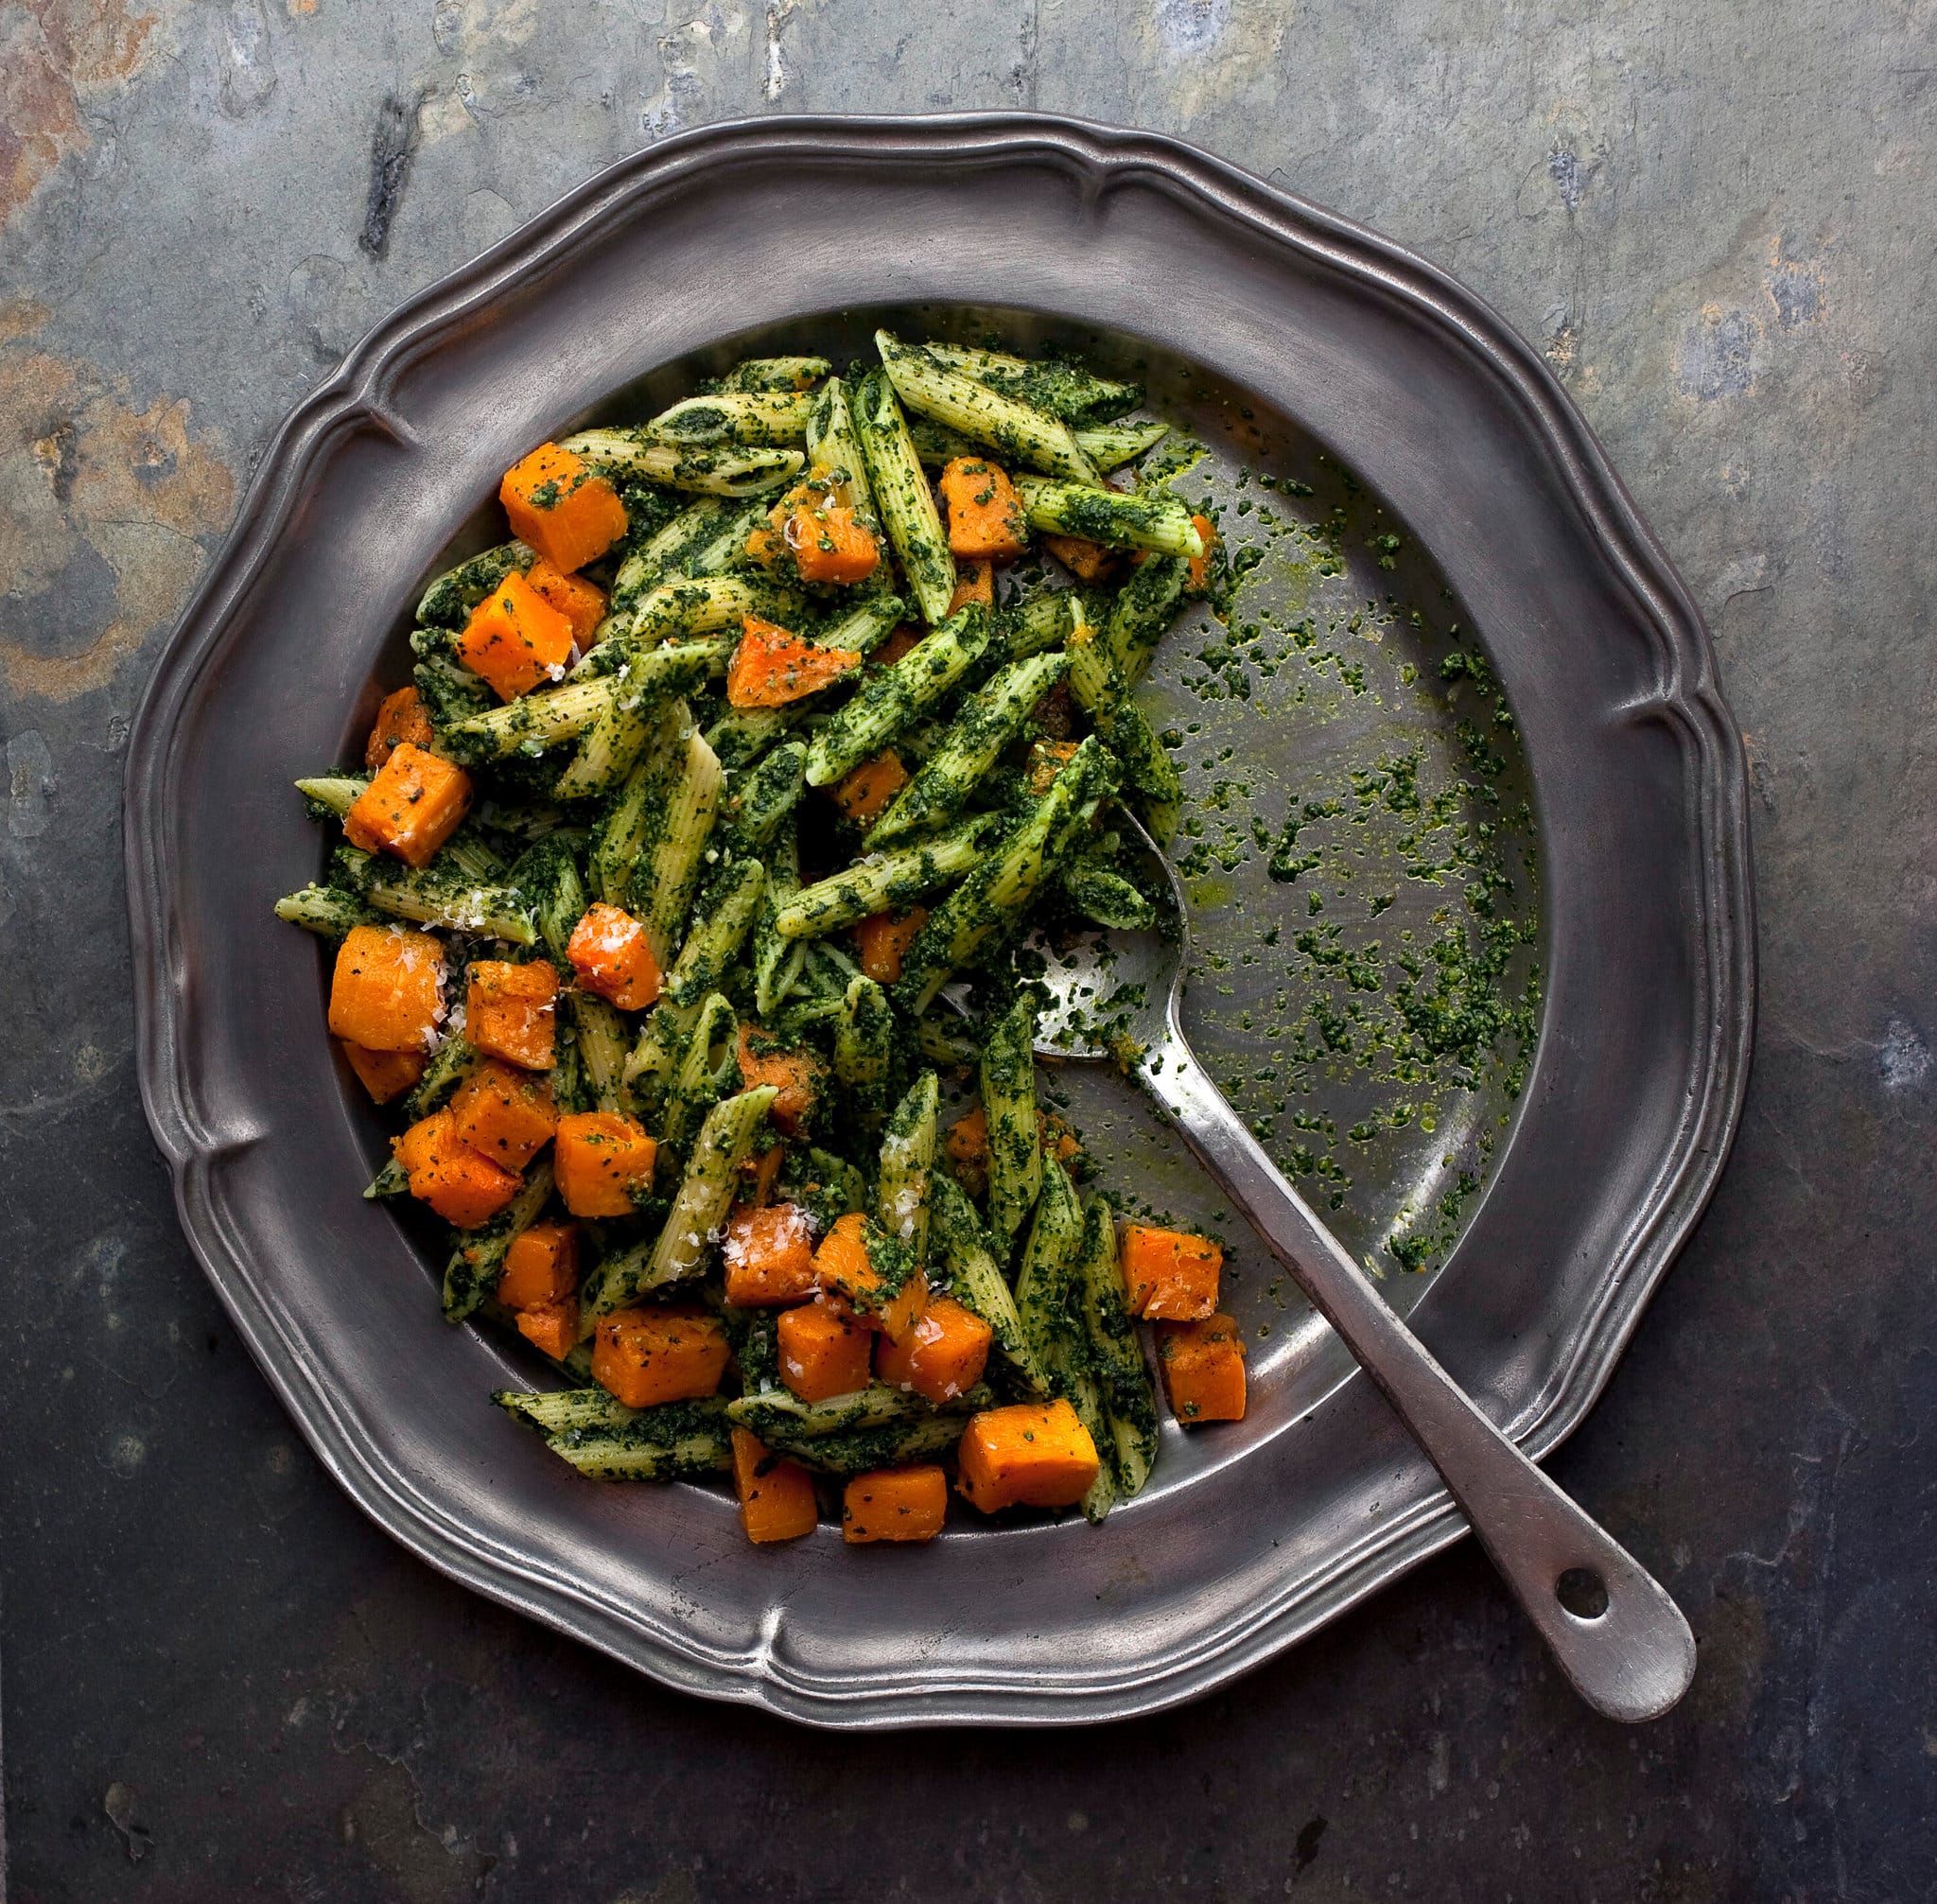 Pasta With Kale Pesto and Roasted Butternut Squash Recipe